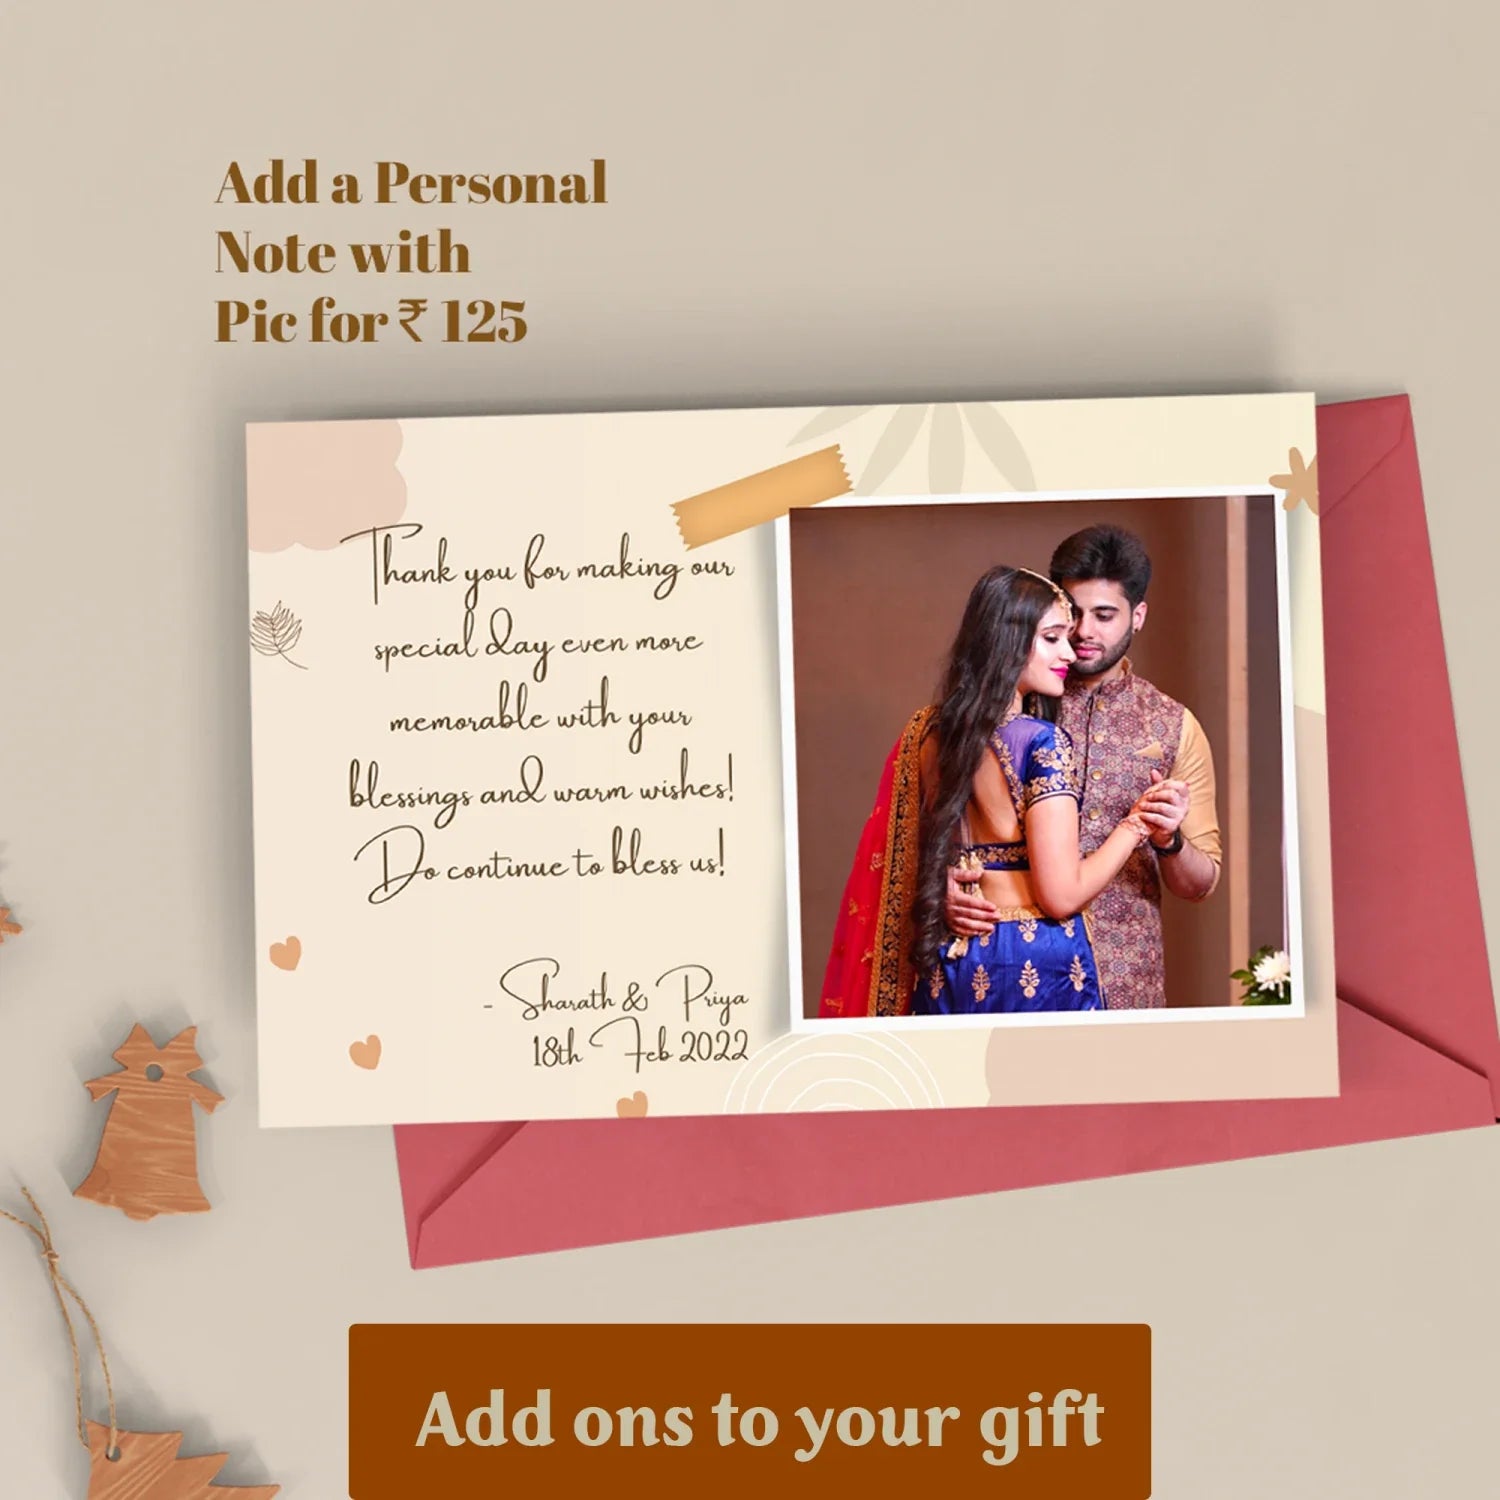 Surprise your partner with this hand-made special note and walk down the memory lane with these nostalgic picture.